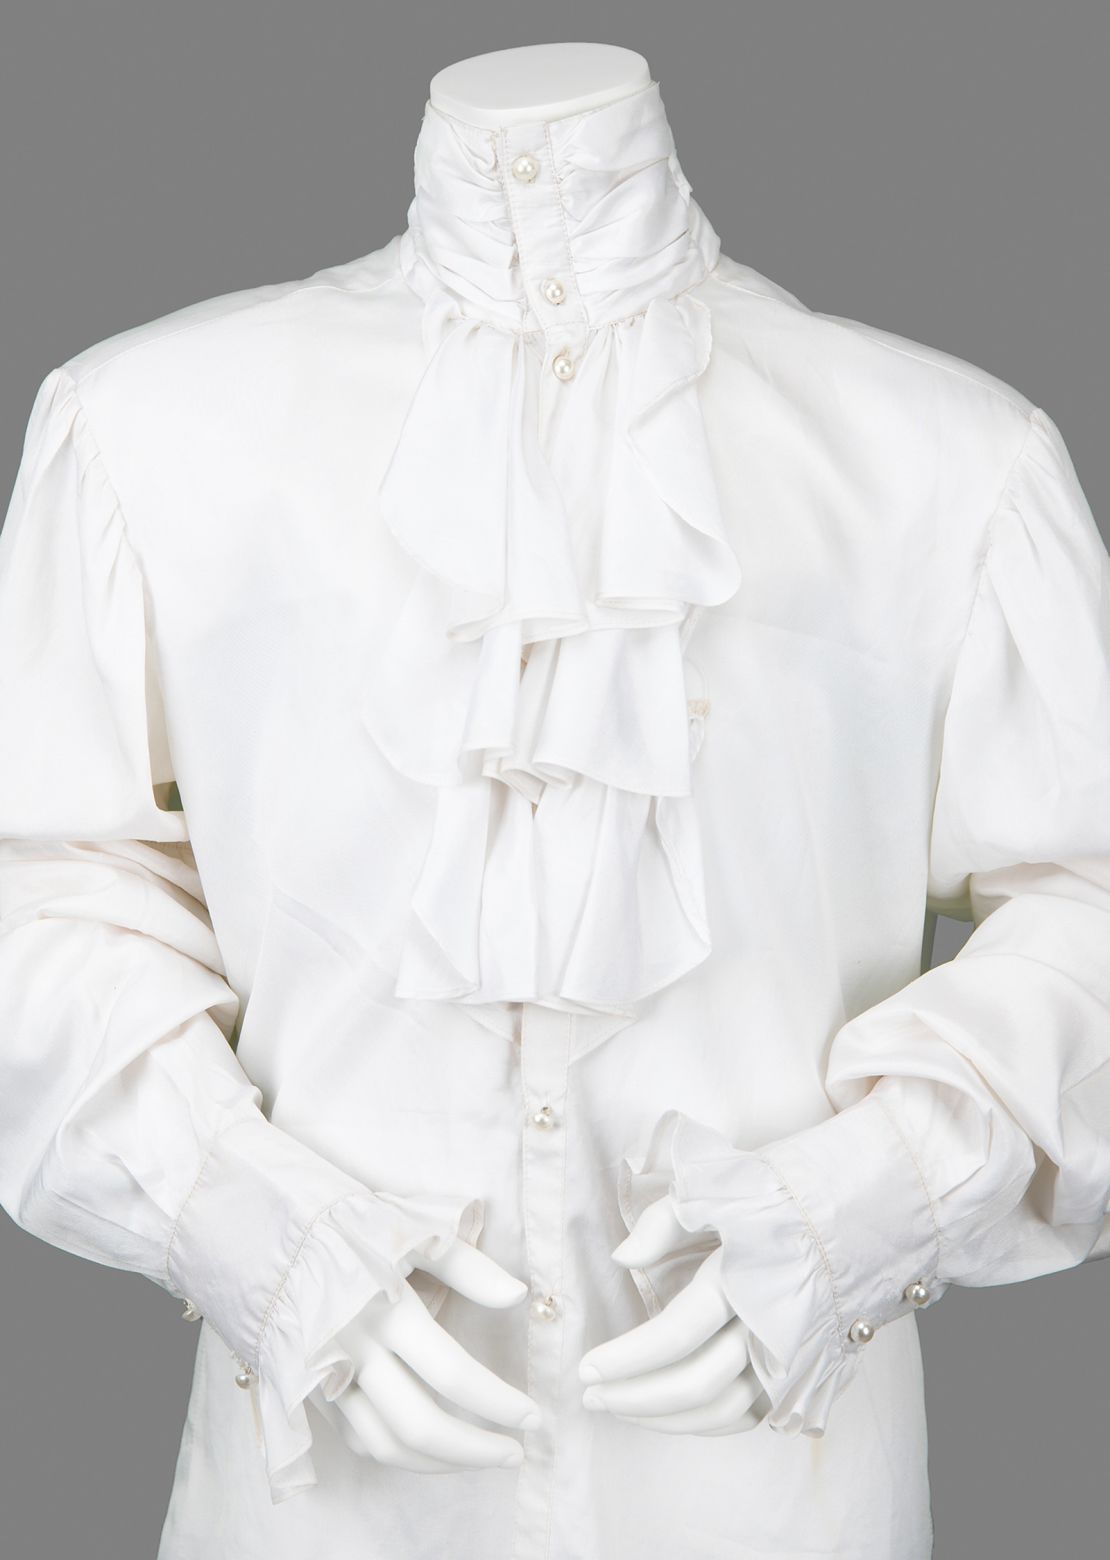 Prince's Stage-Worn White Ruffled Shirt from the 12th Annual American Music Awards